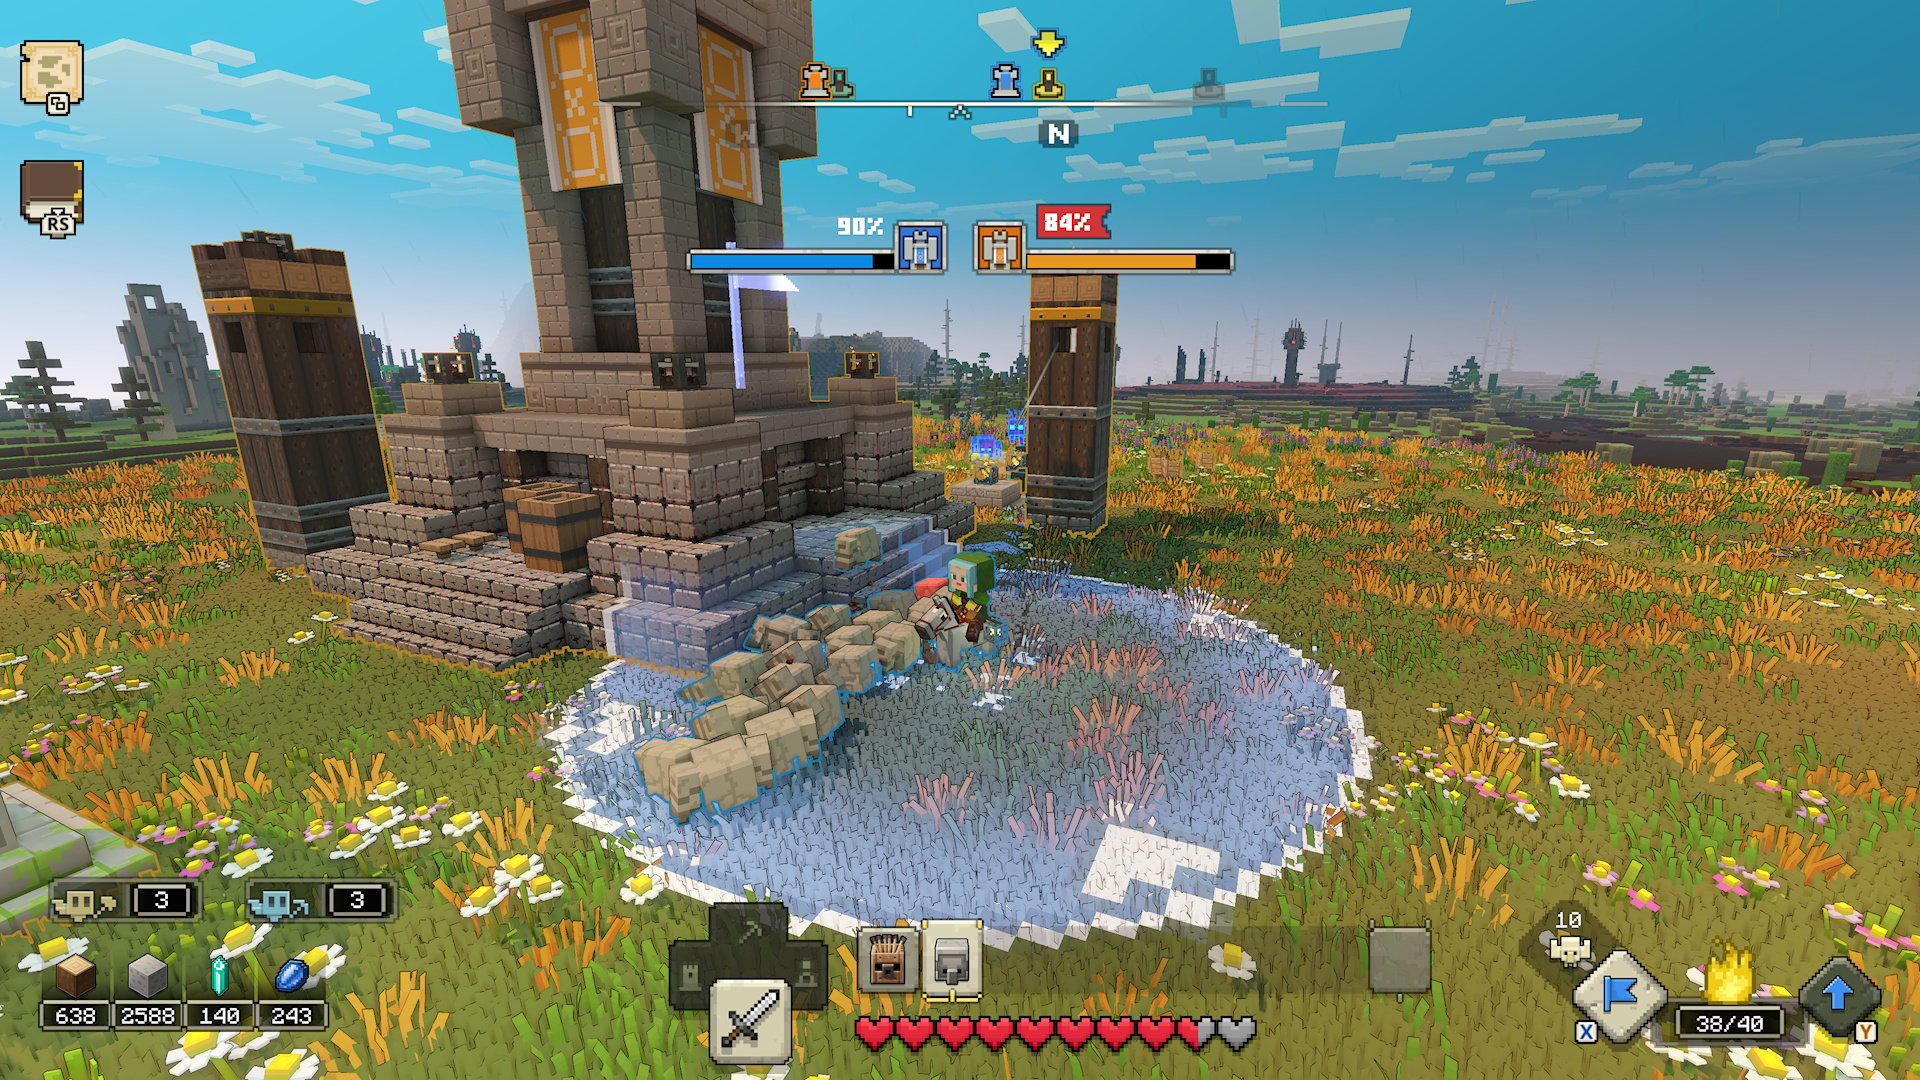 Review] Minecraft Legends multiplayer PVP mode gameplay